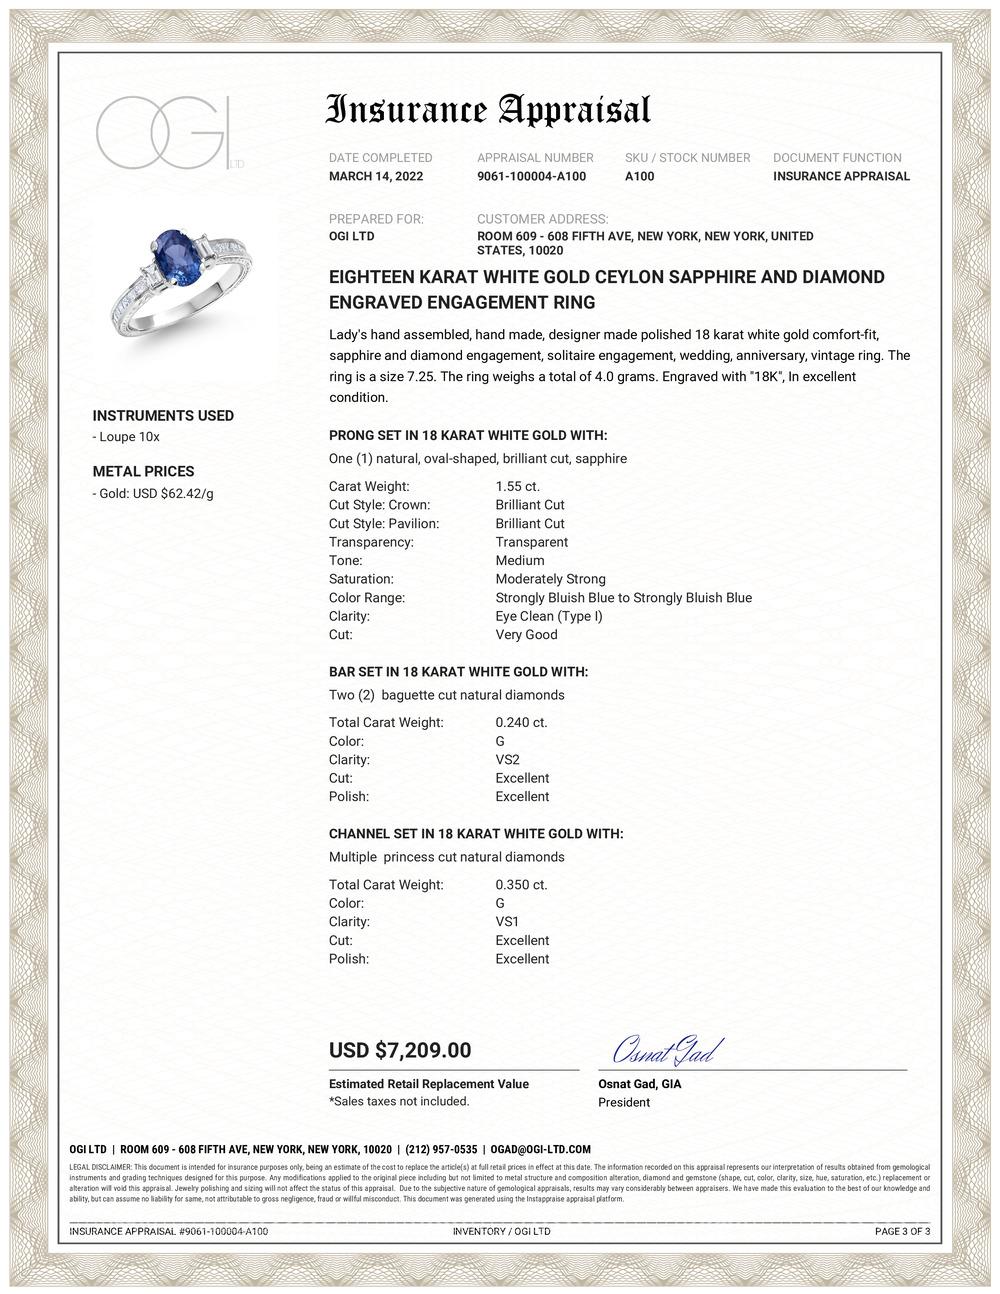 18 karat white gold Ceylon Sapphire and diamond engraved engagement or cocktail ring
Oval Ceylon sapphire weighing 1.55 carats
Two baguette diamonds and princess cut diamonds weighing approximately 0.50 to 0.60 carats
Finger size 7.25
Ring can be